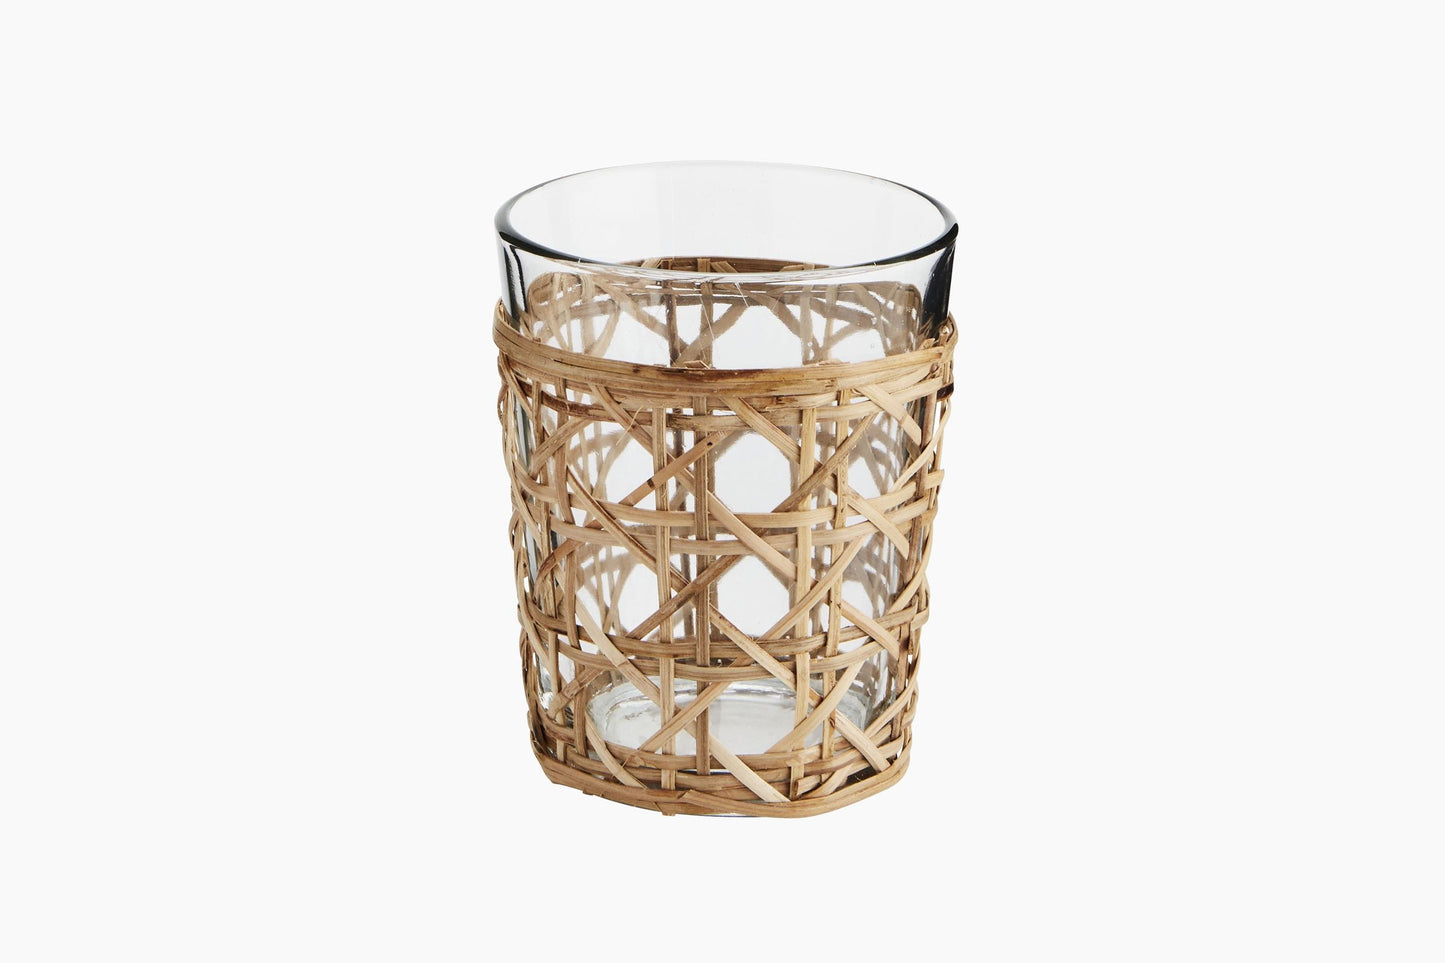 Drinking glass in bamboo holder